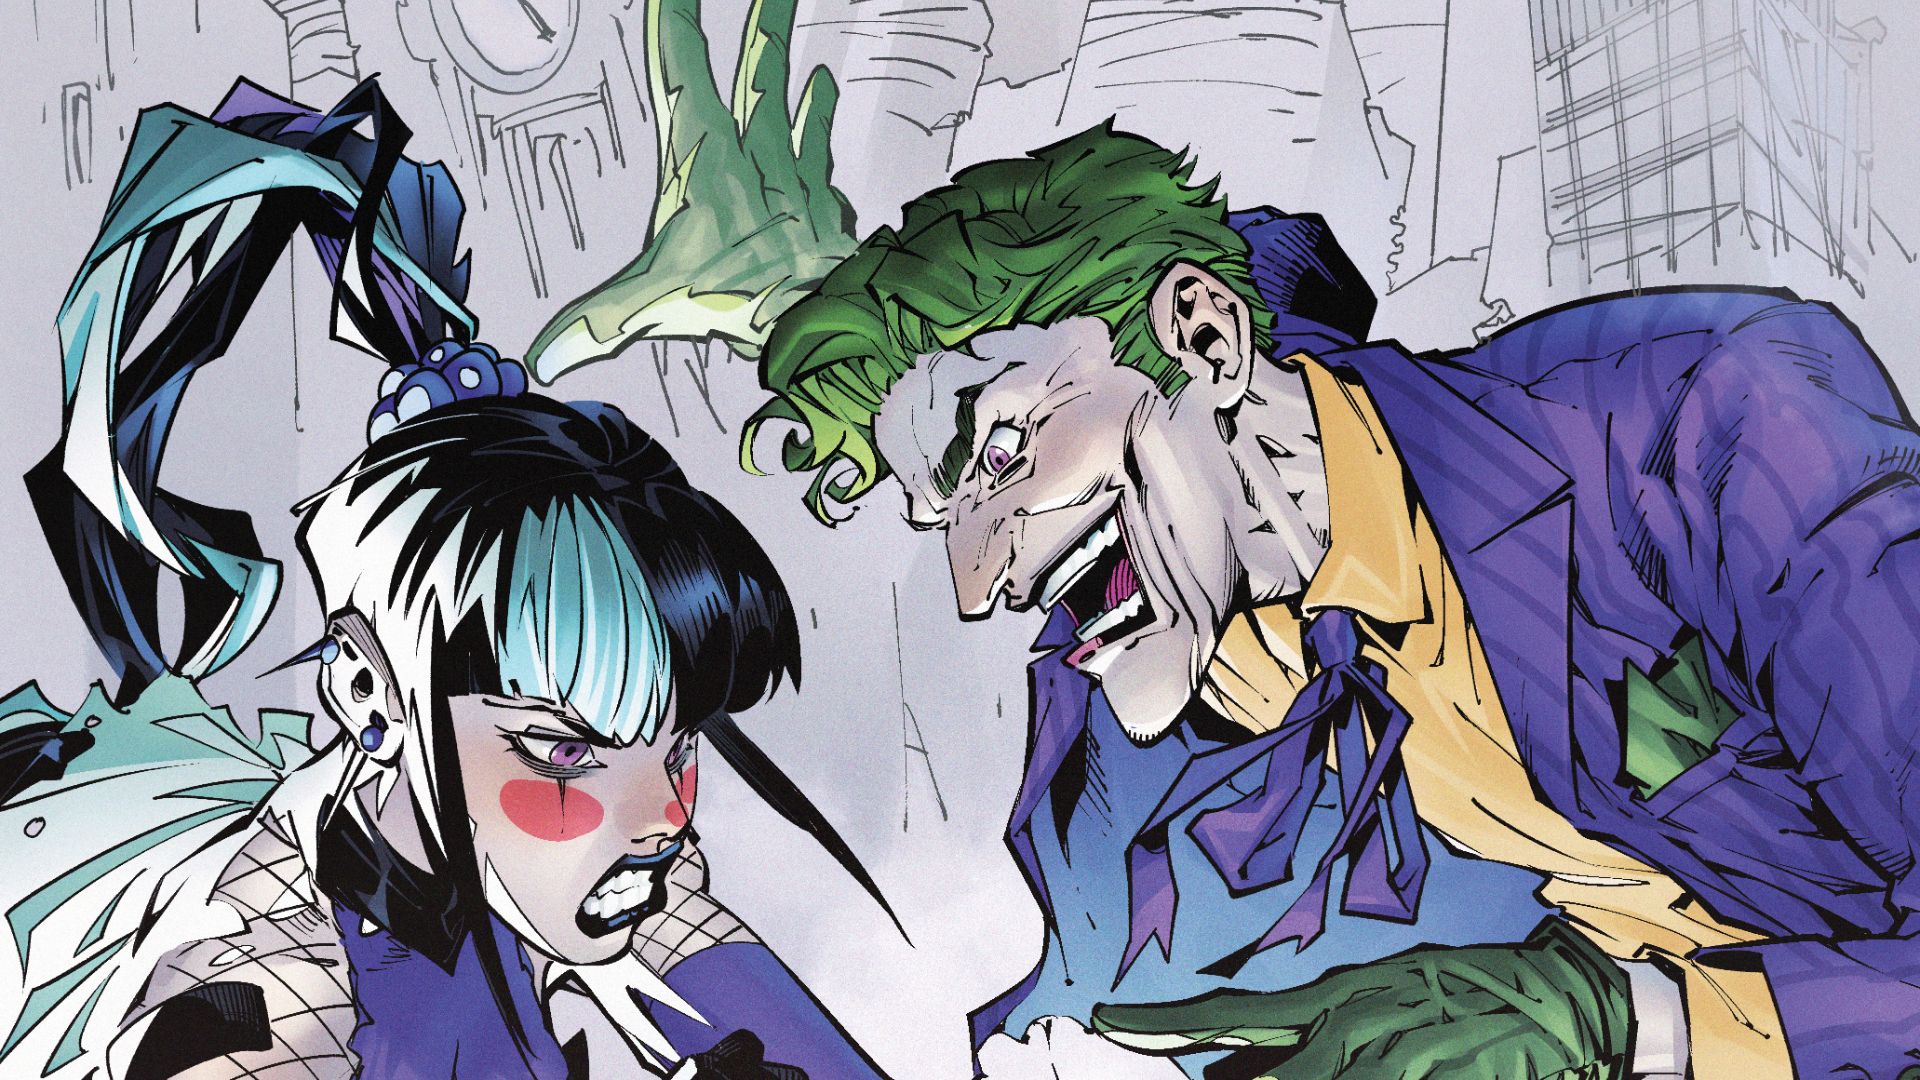 Joker returns to interfere with Punchine’s “Gotham Game” in series finale